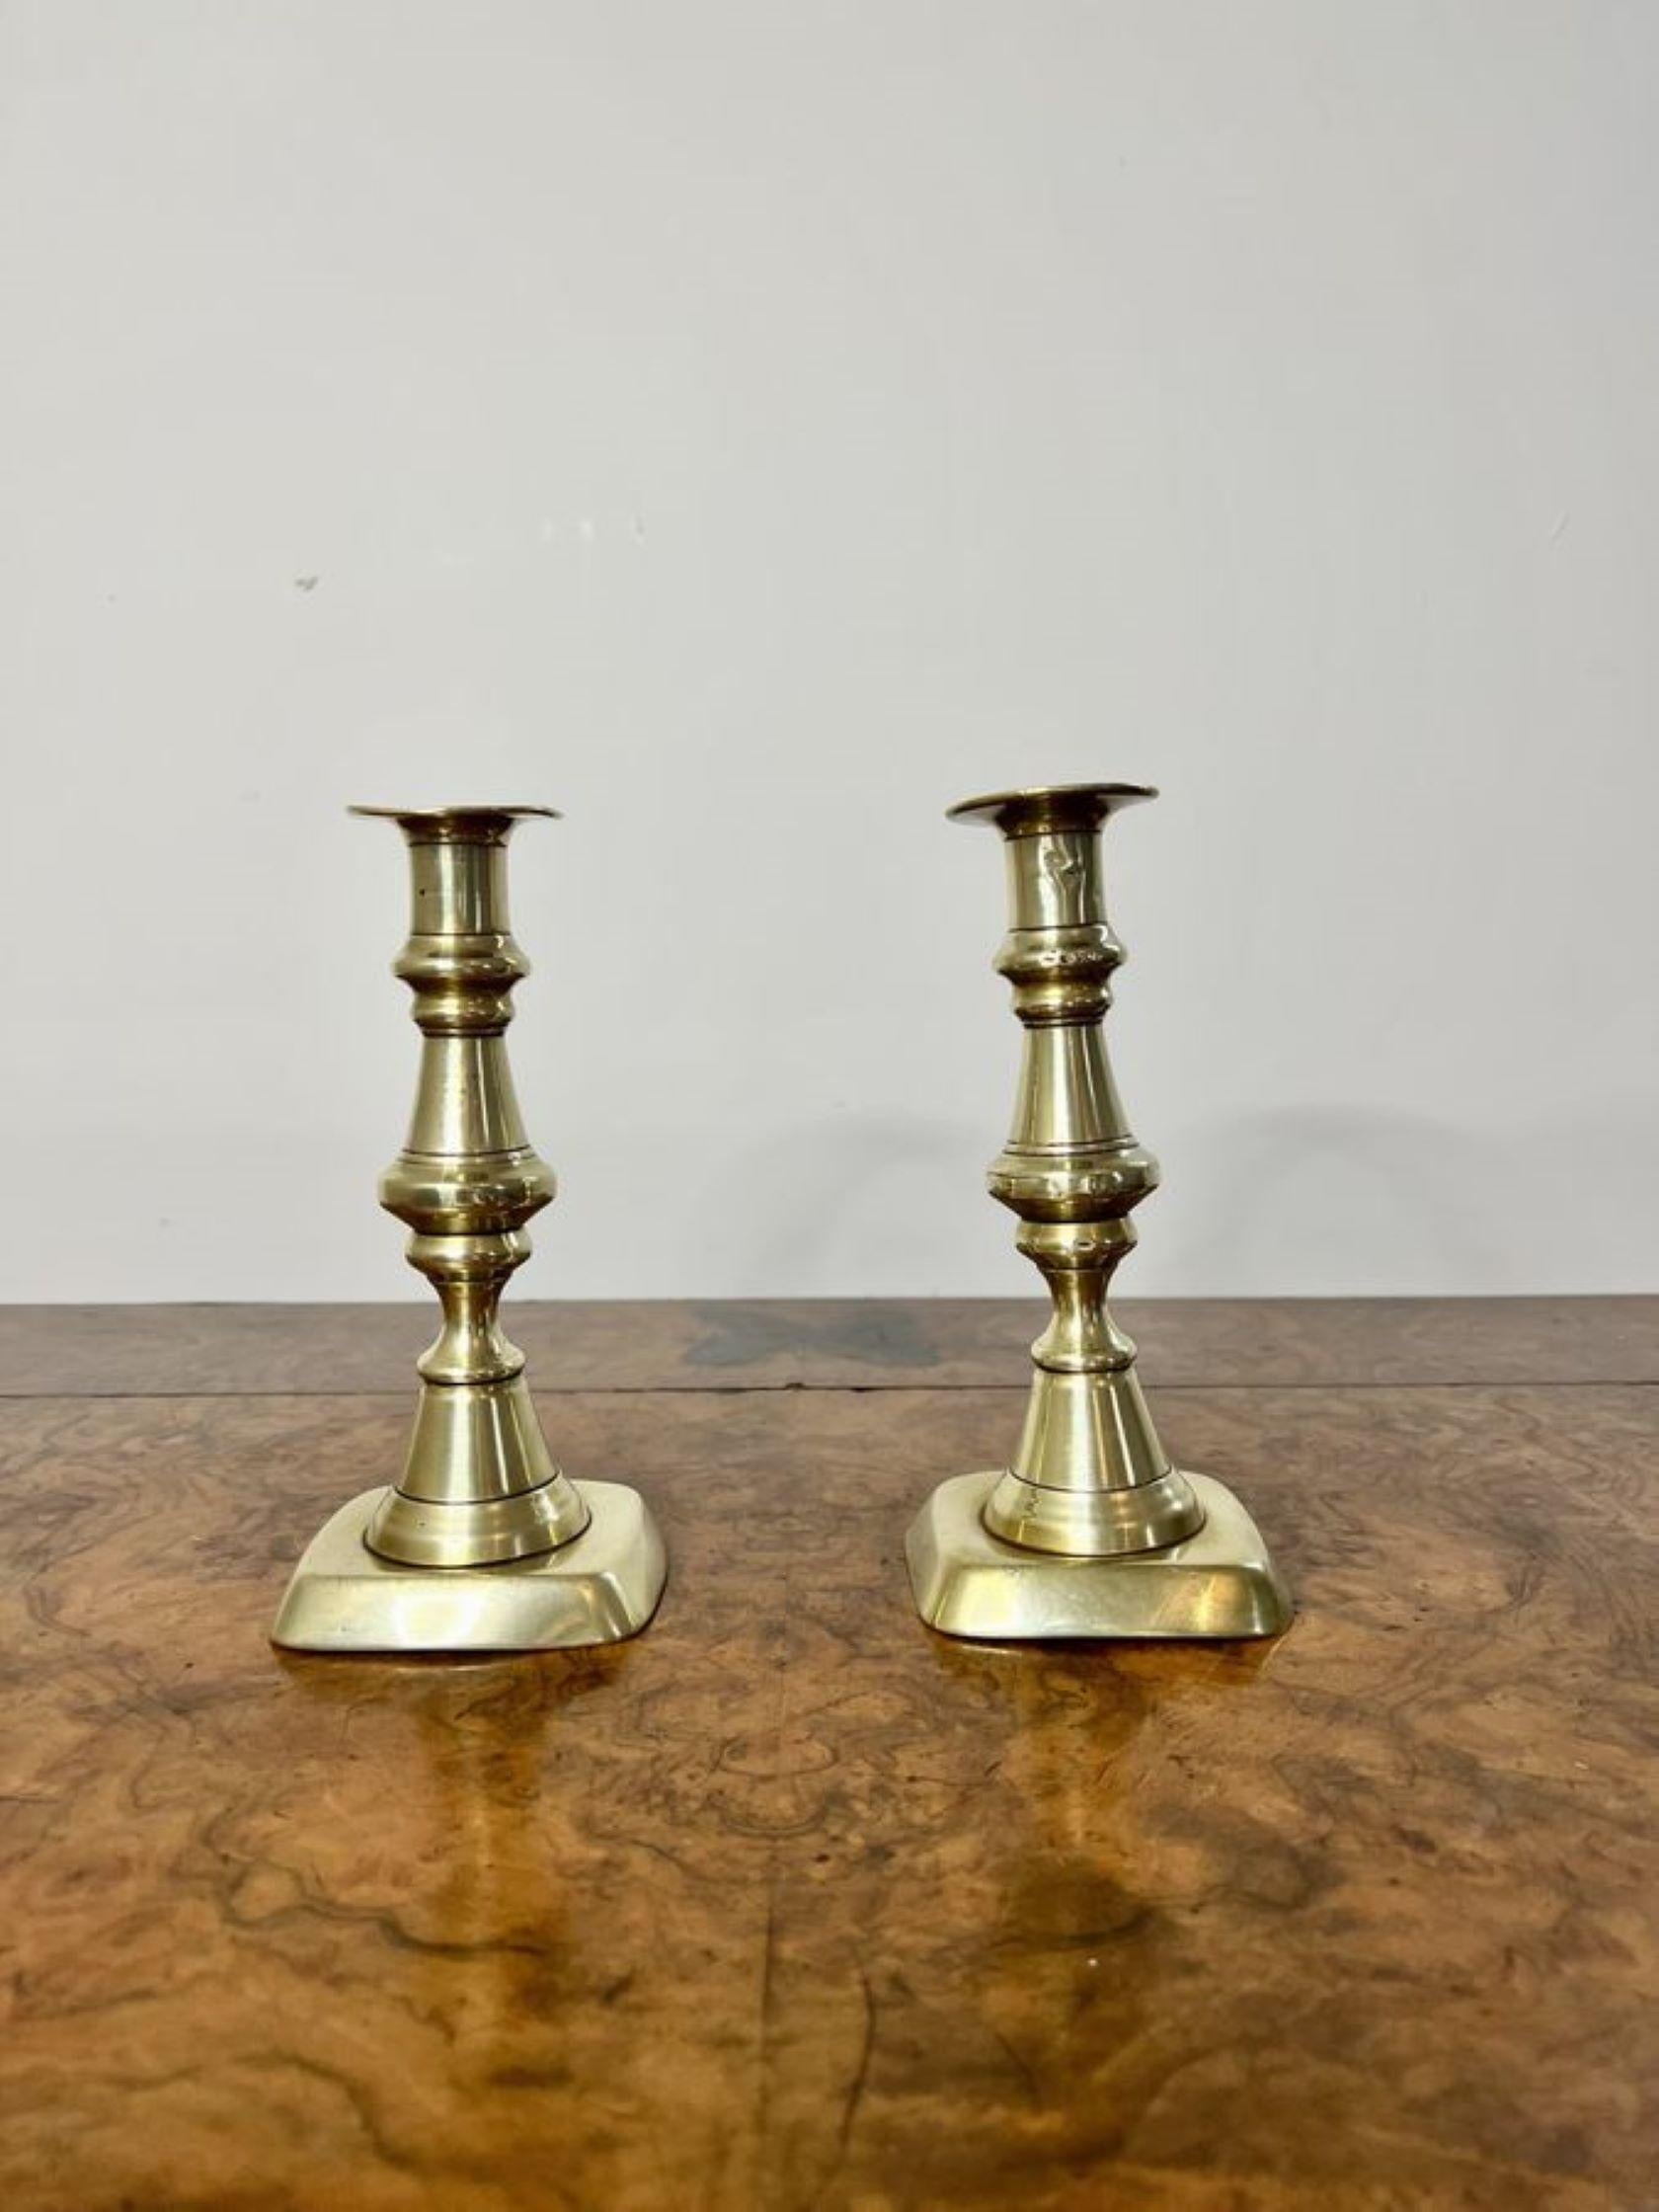 Lovely pair of antique Victorian brass candlesticks having a lovely pair of antique brass candlesticks with turned shaped columns standing on square bases.

D. 1860